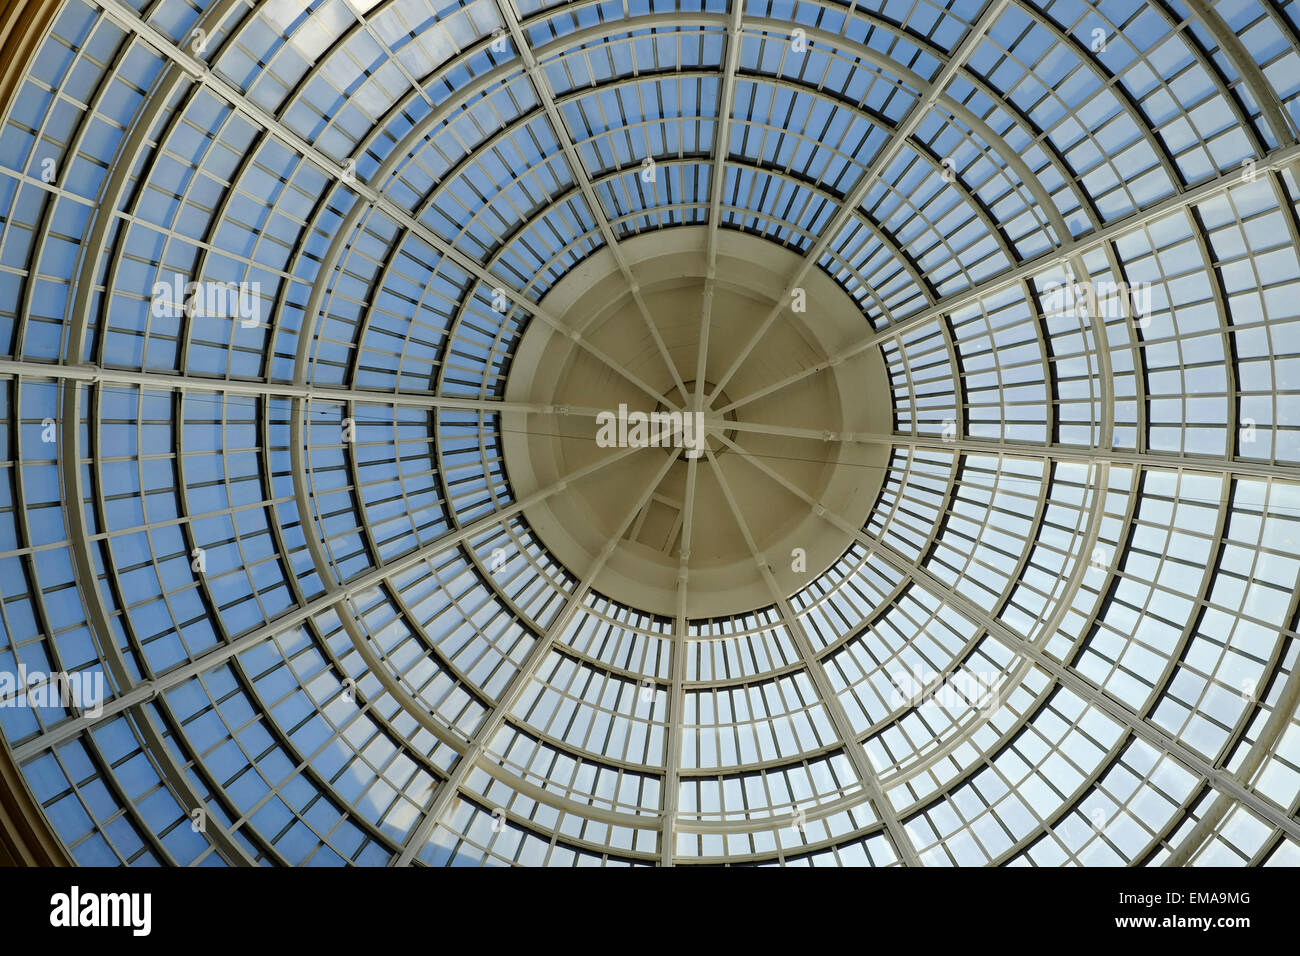 The ornate glass dome of Blackpool's Winter Gardens building Stock Photo